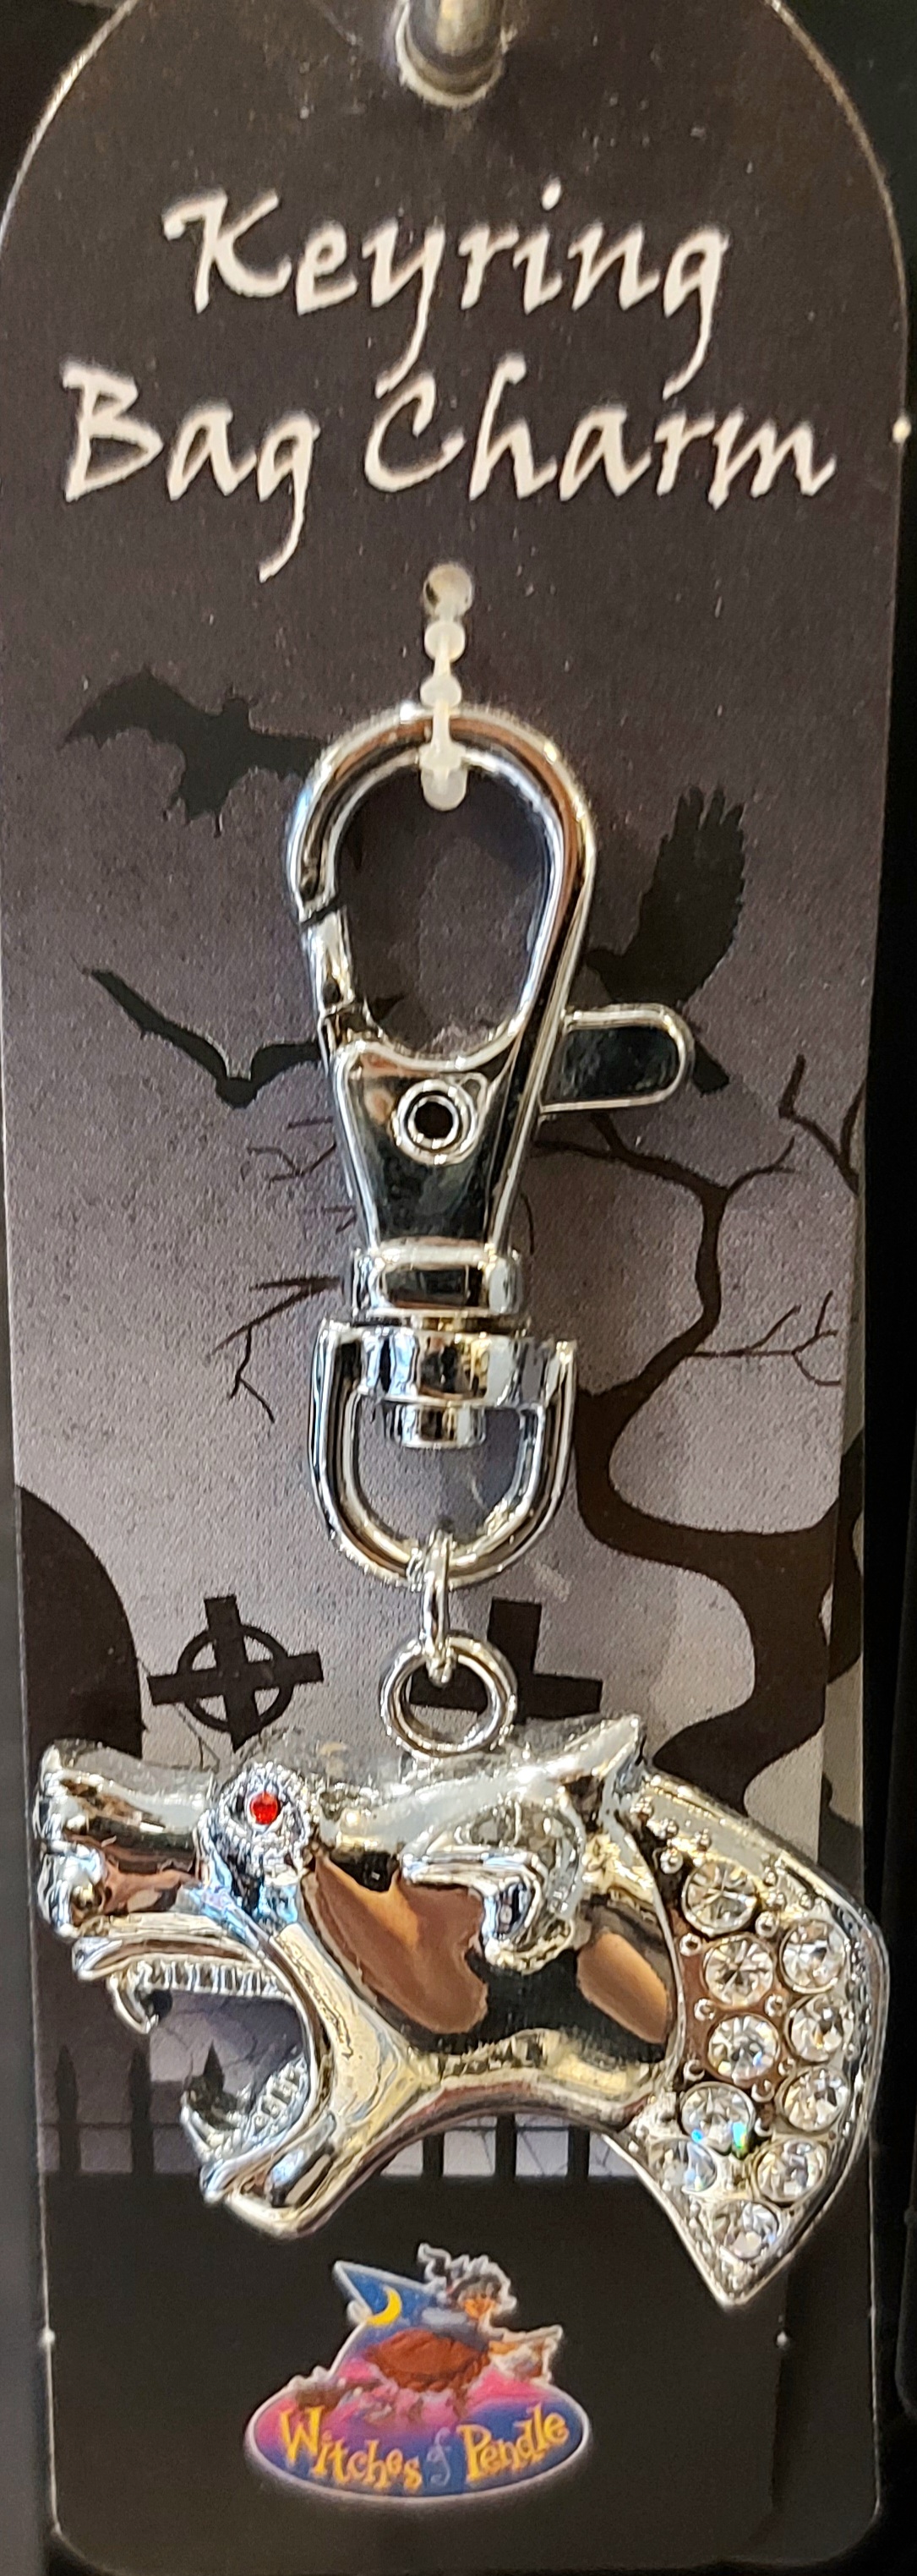 Witches of pendle diamante bag charm/keyring hound of the baskervilles 